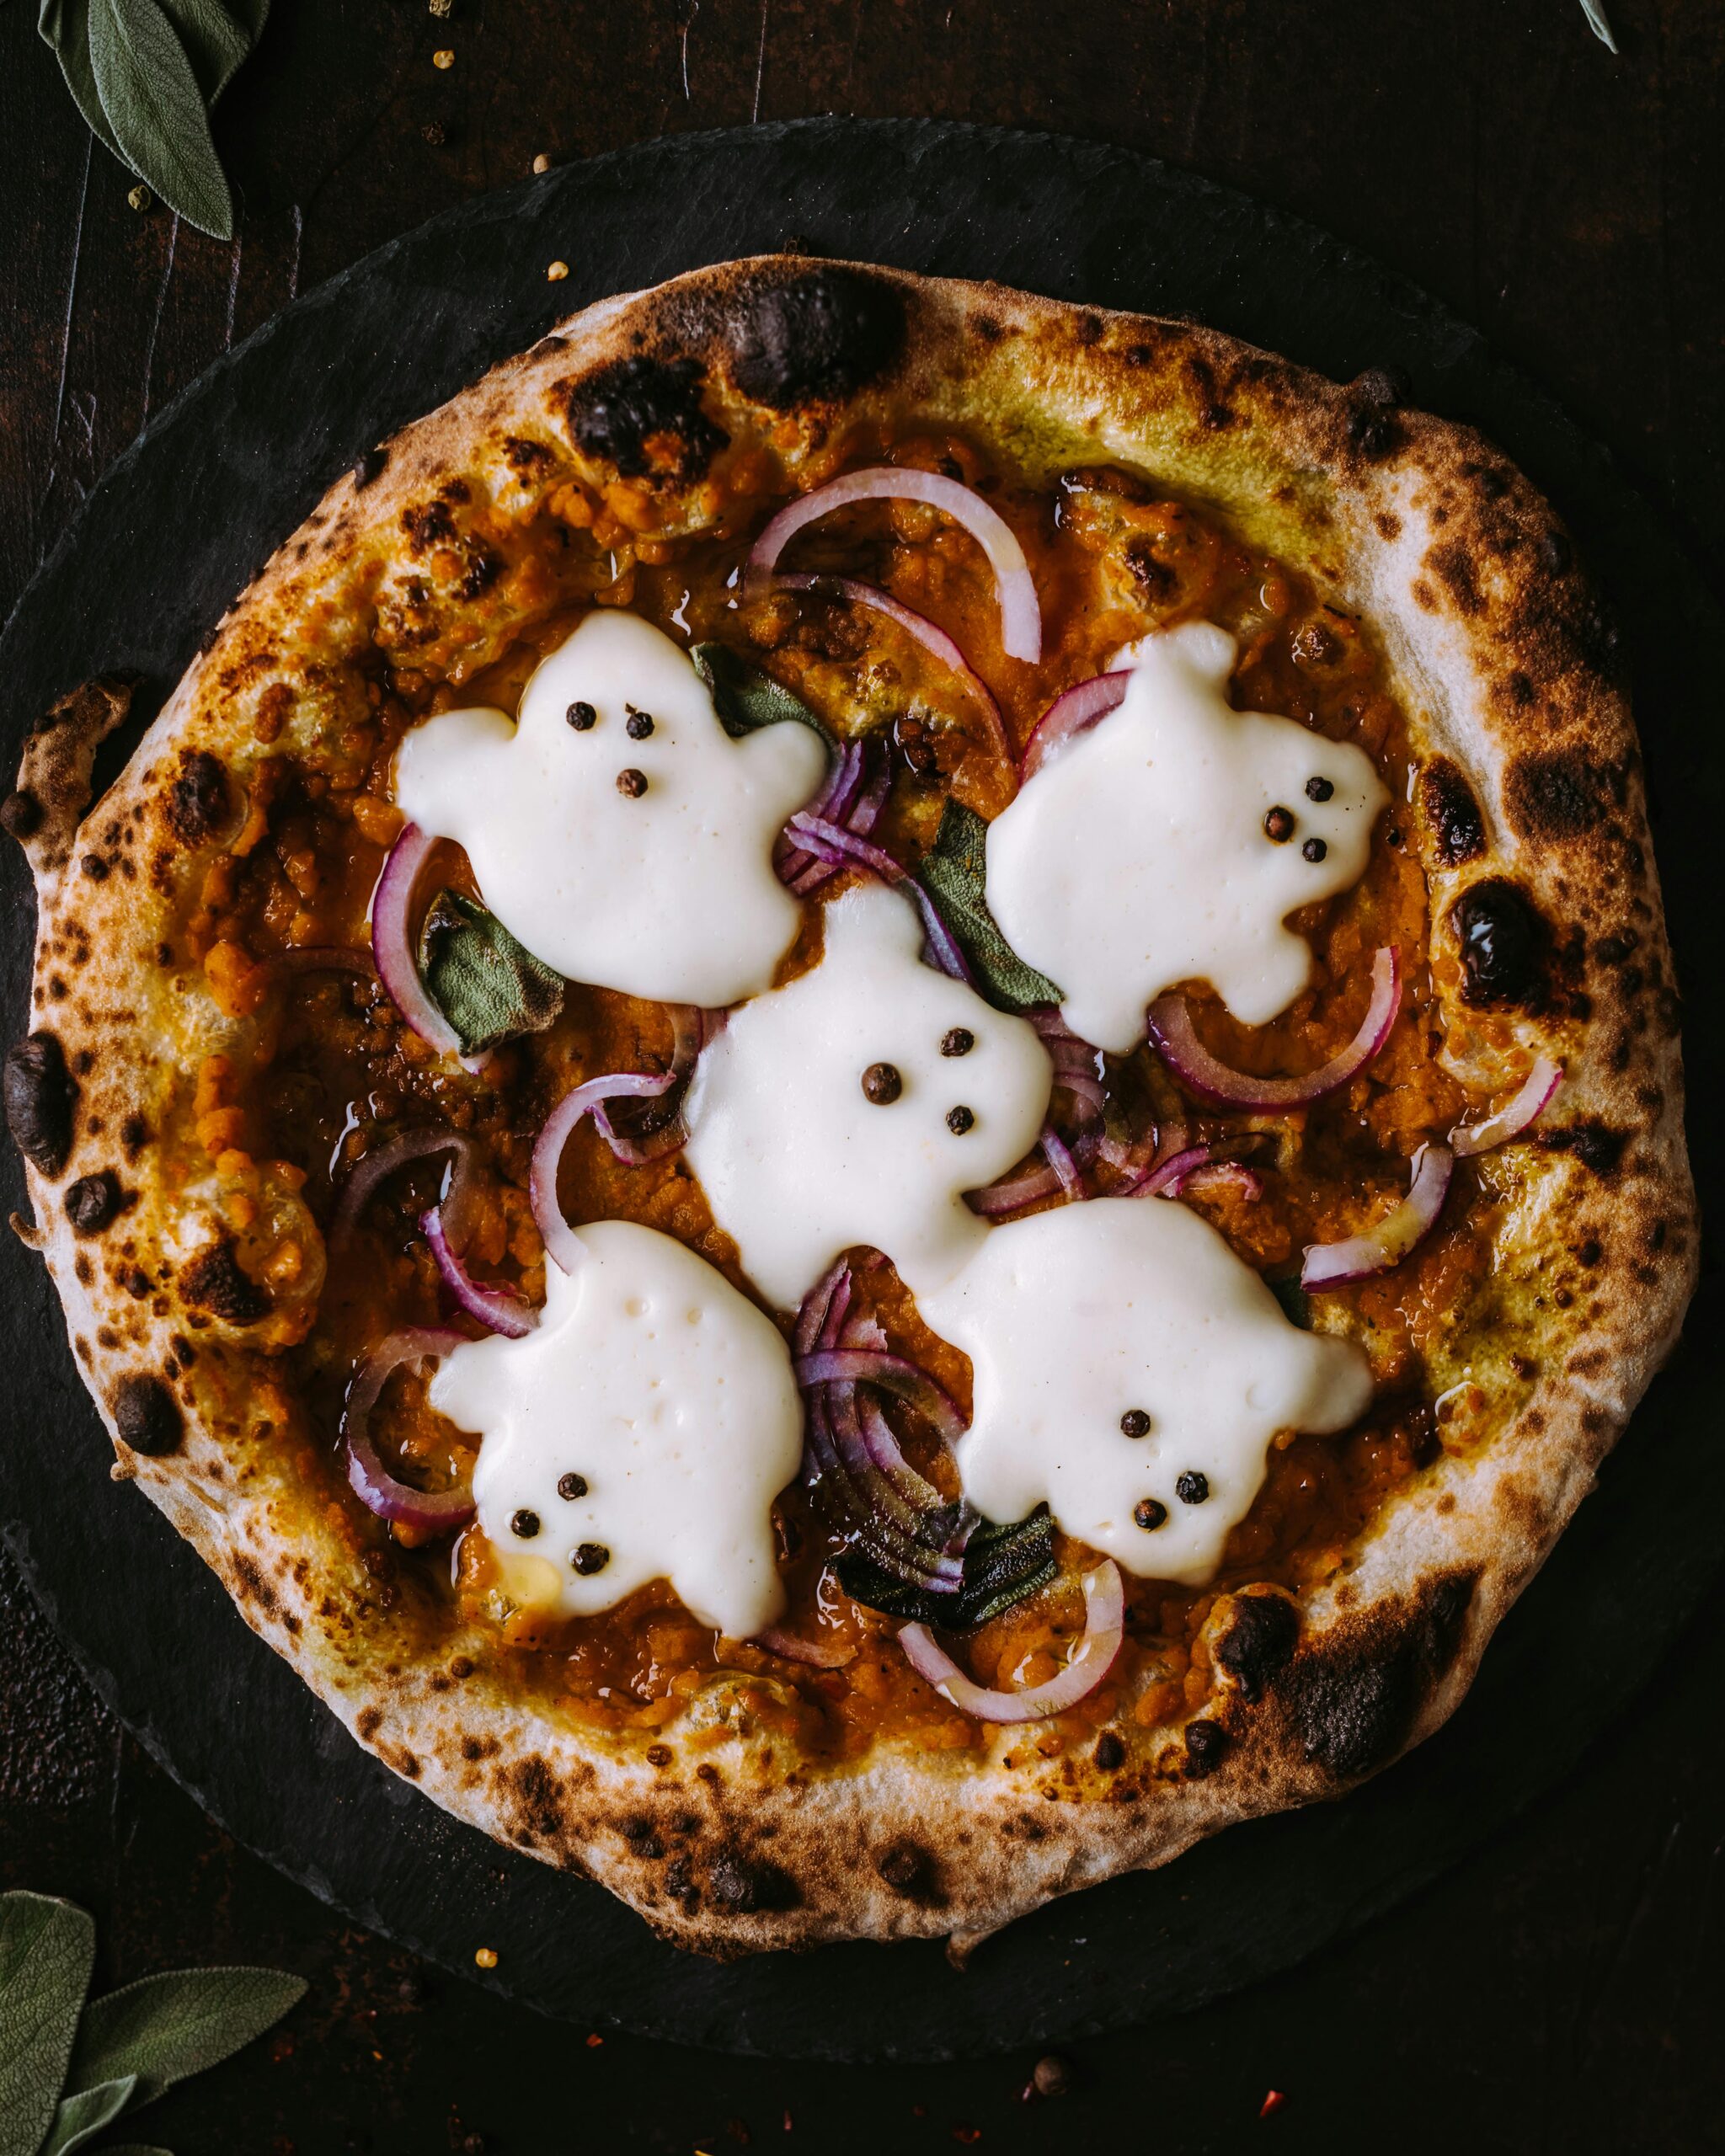 How to Find Walnut Creek's Finest Pizza